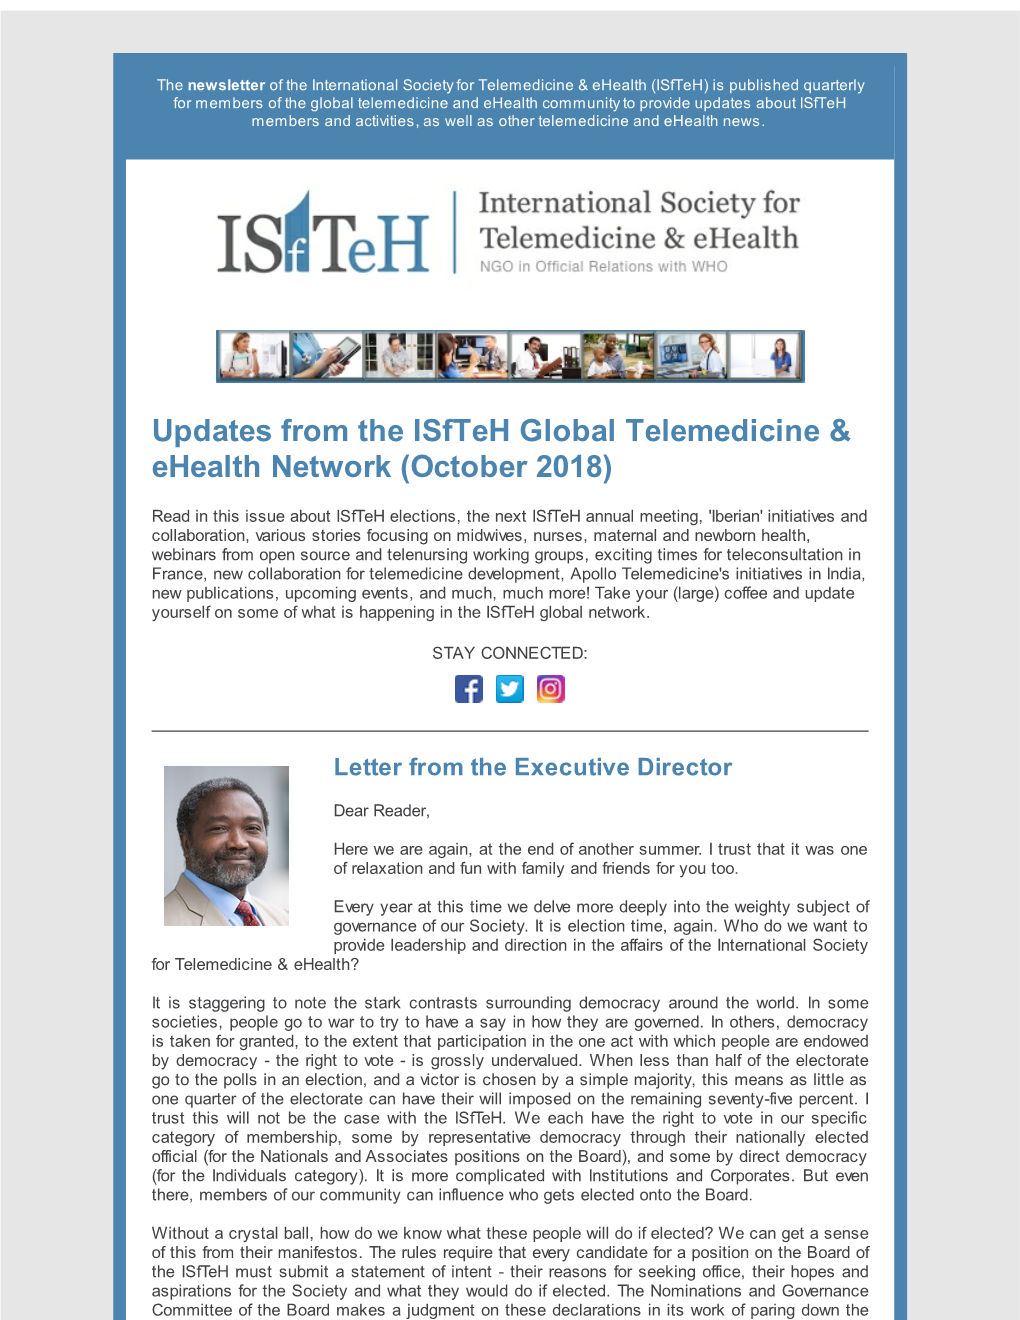 Updates from the Isfteh Global Telemedicine & Ehealth Network